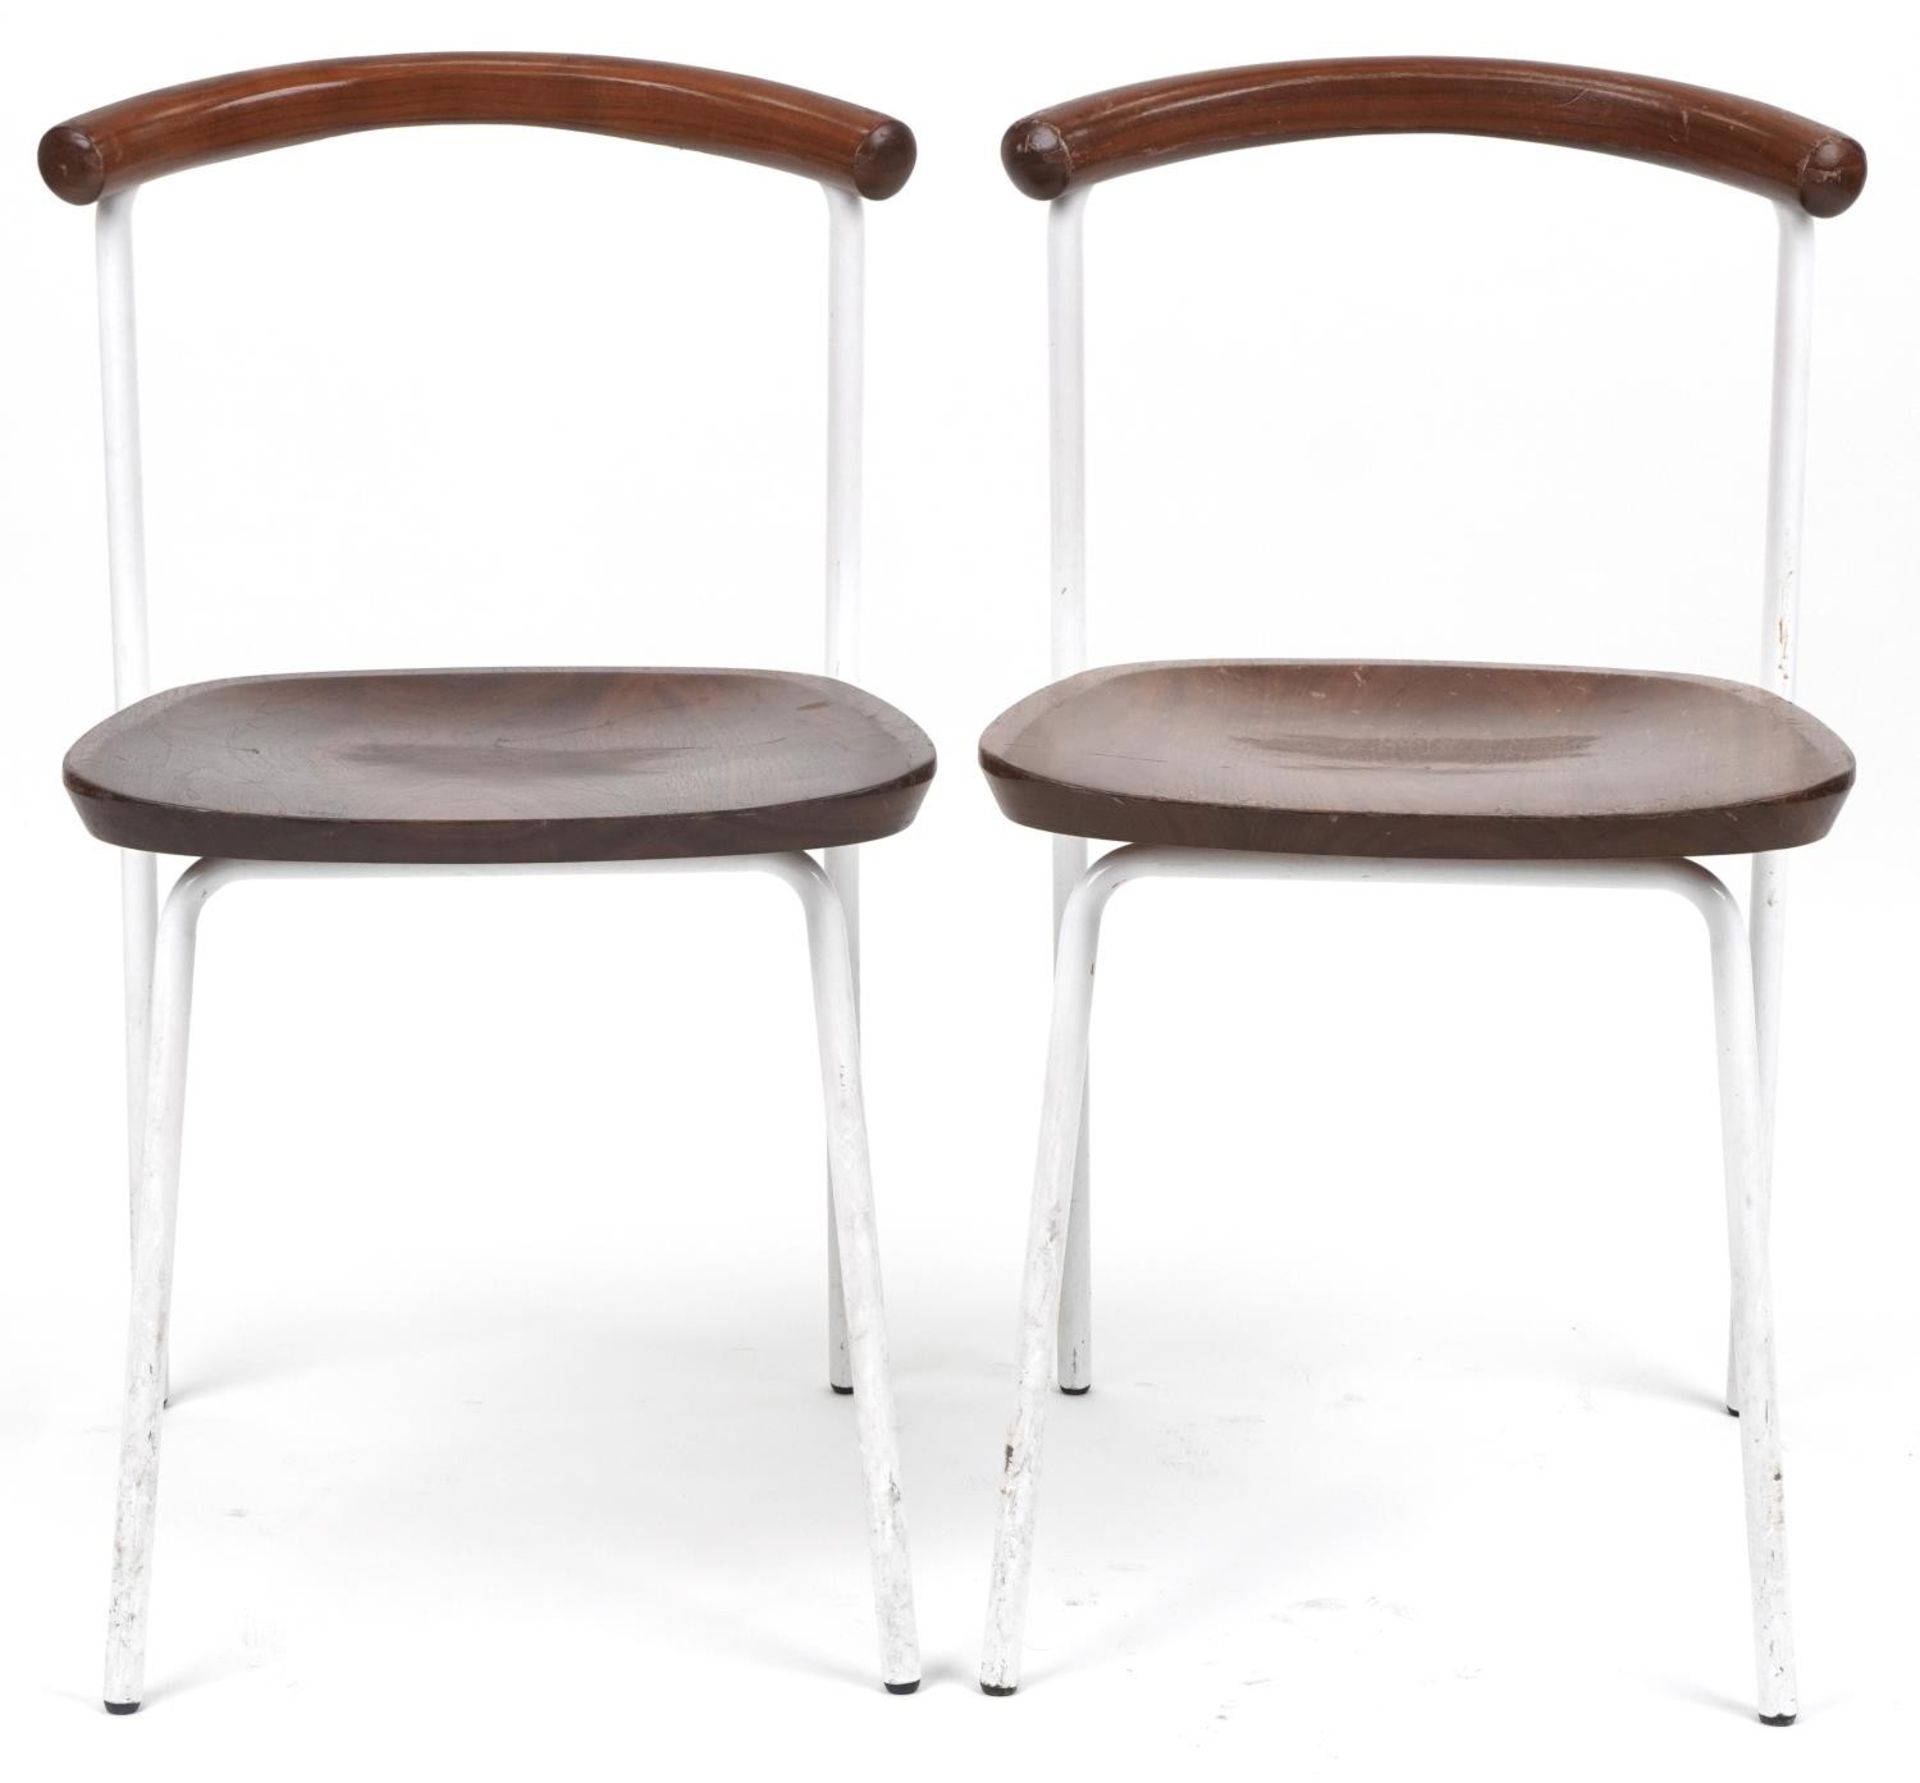 Manner of Calligaris, pair of contemporary metal framed hardwood bistro chairs, 75cm high - Image 2 of 4